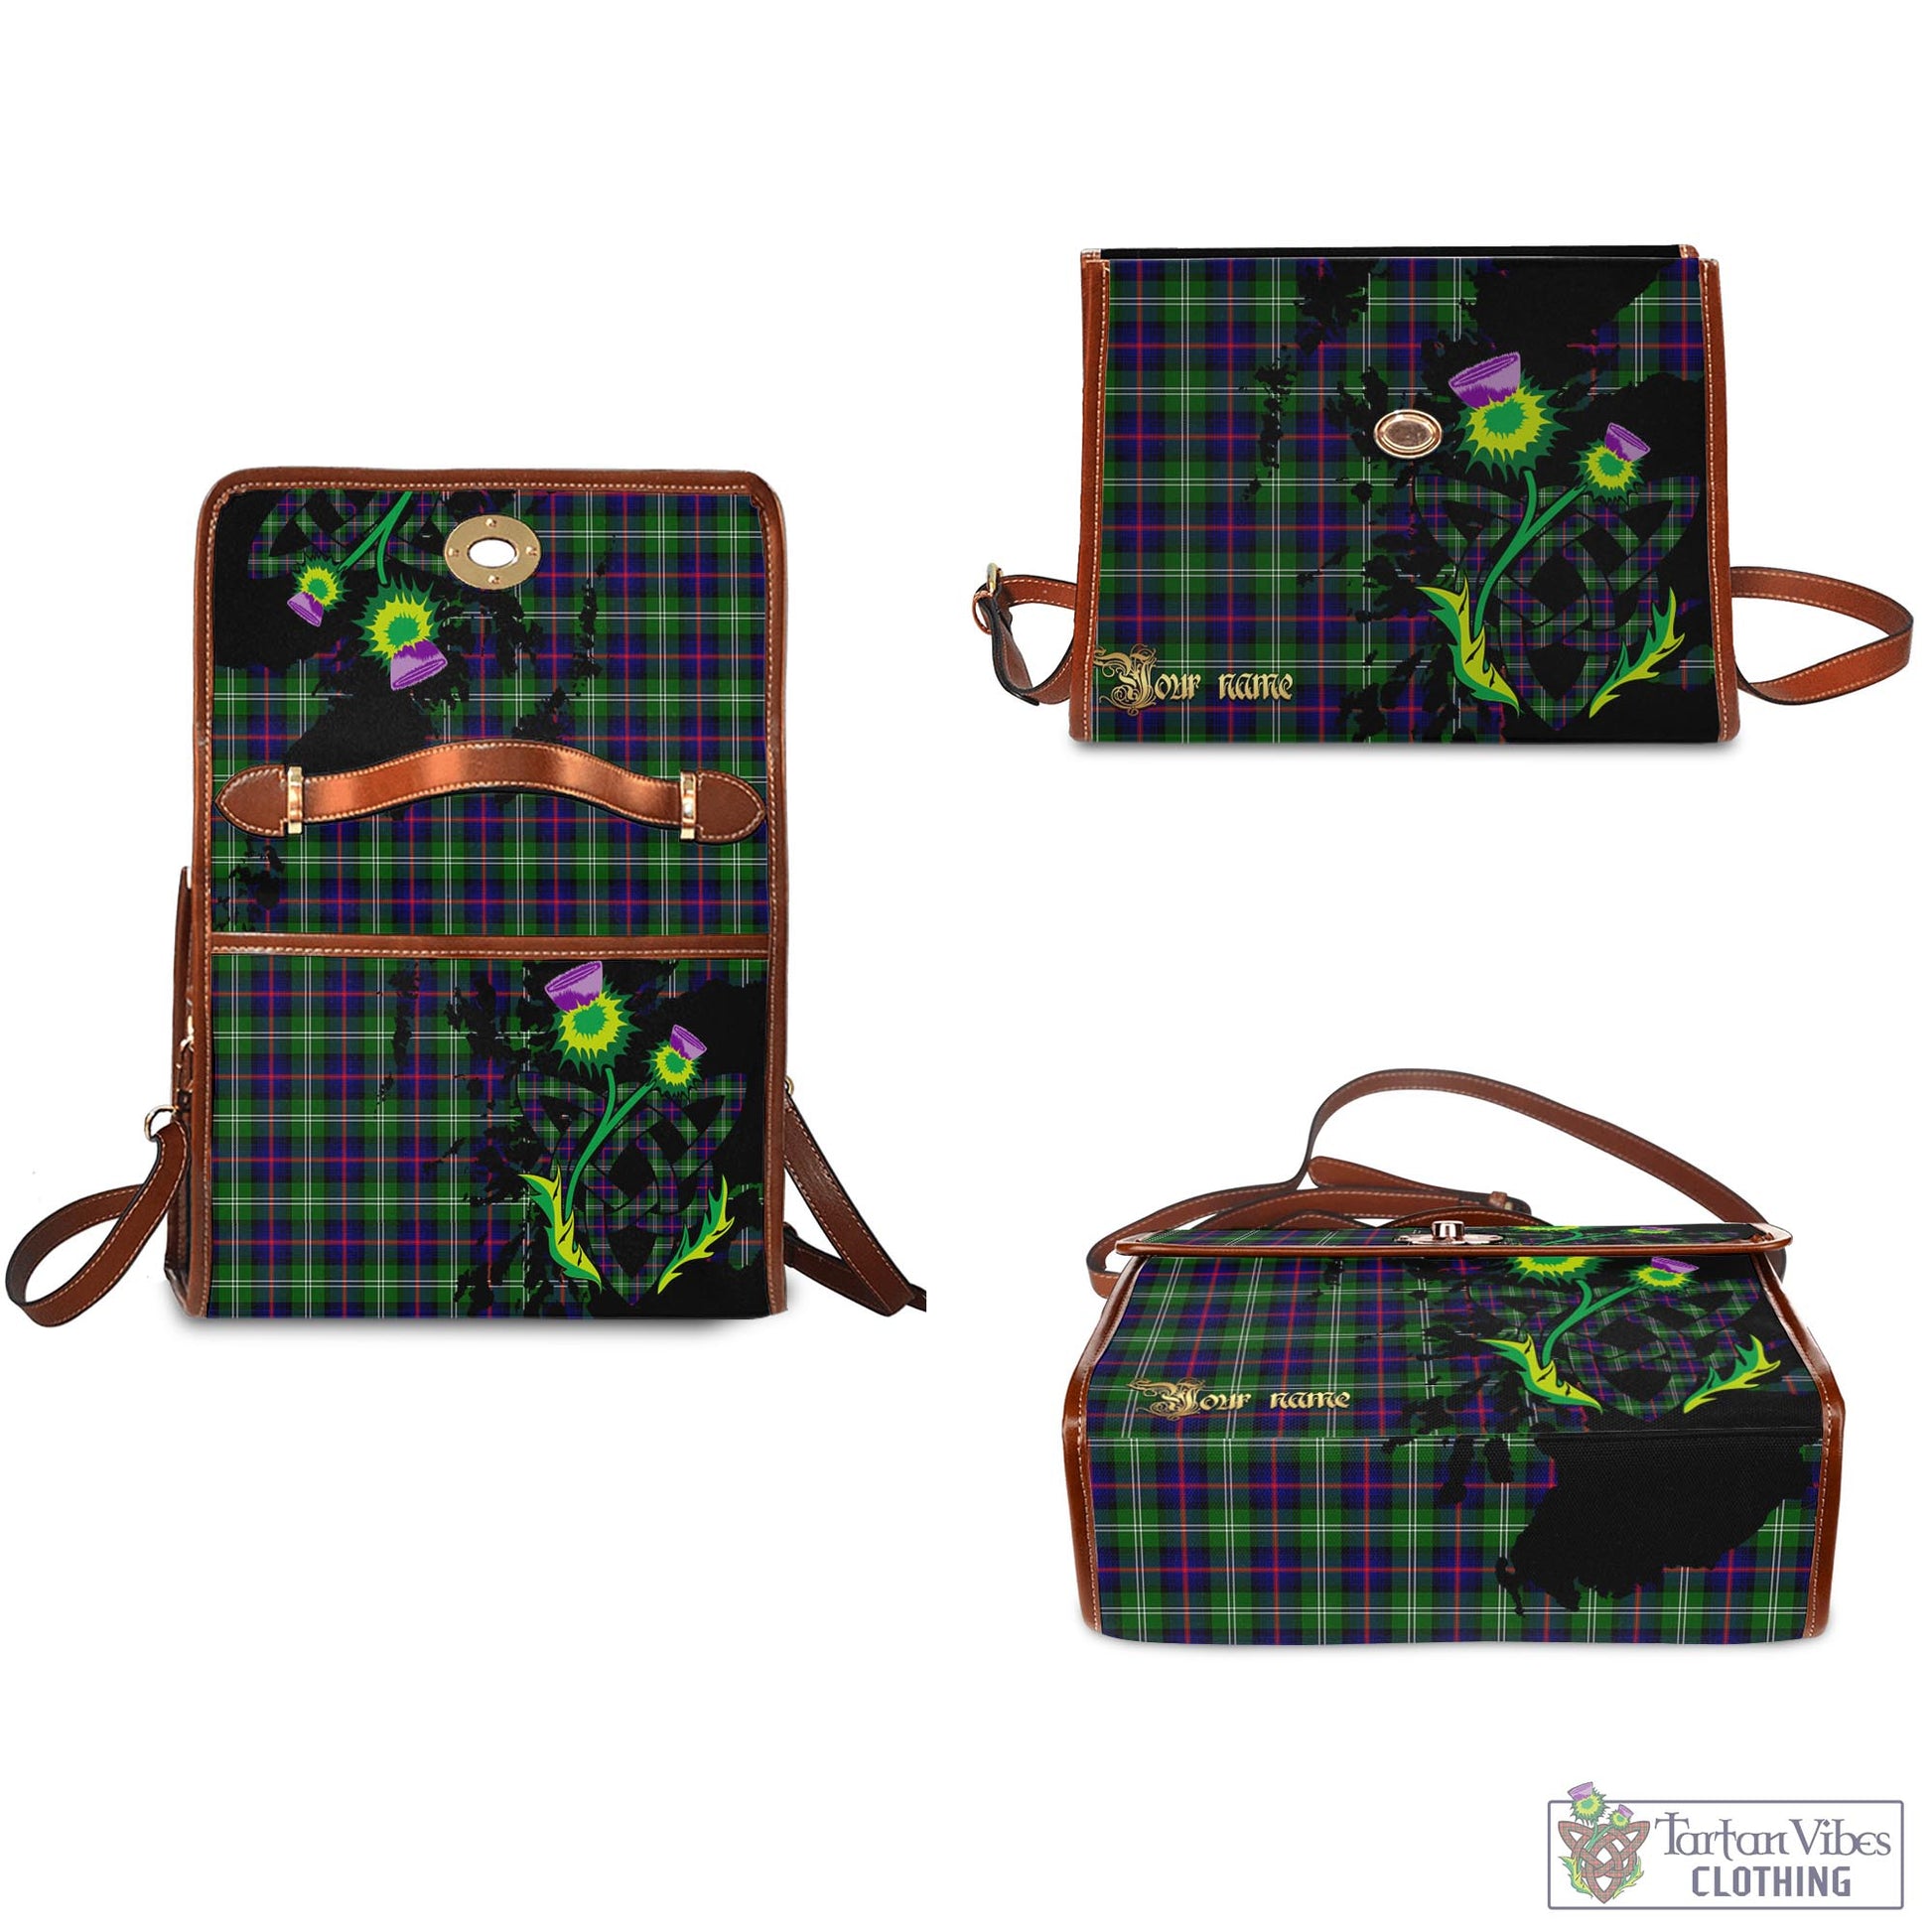 Tartan Vibes Clothing Sutherland Modern Tartan Waterproof Canvas Bag with Scotland Map and Thistle Celtic Accents